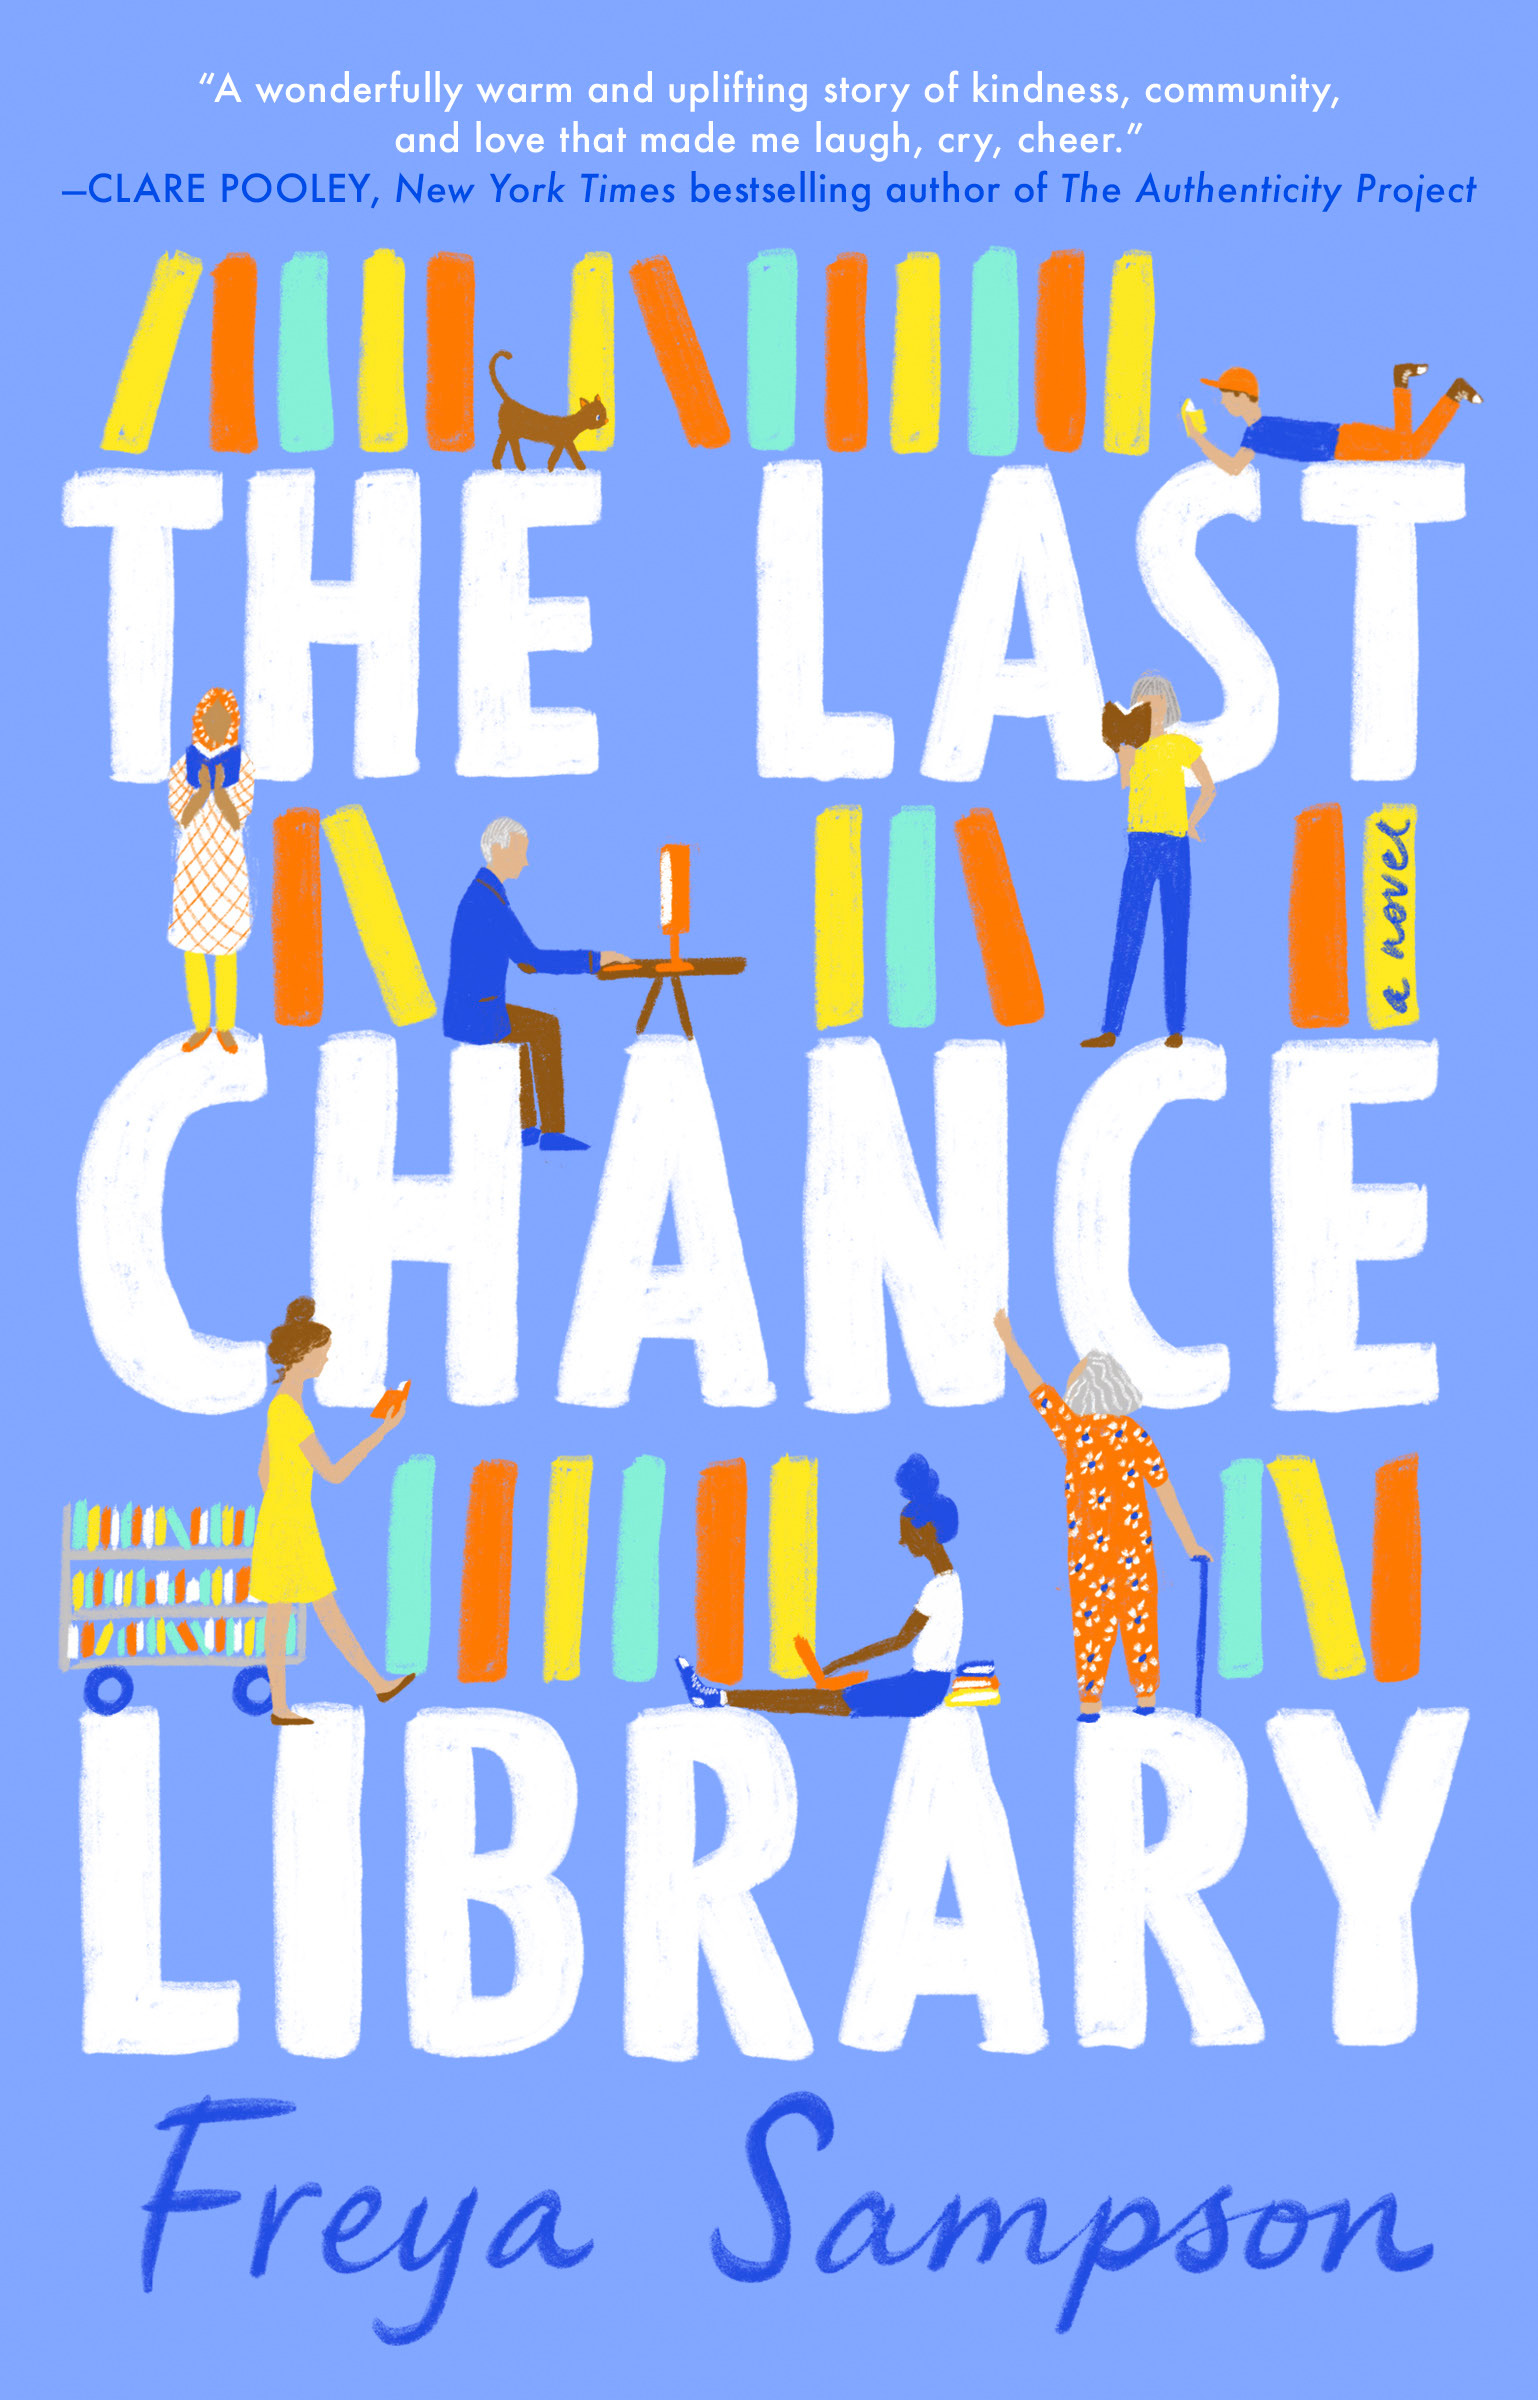 Buy THE LAST CHANCE LIBRARY (US) thumbnail